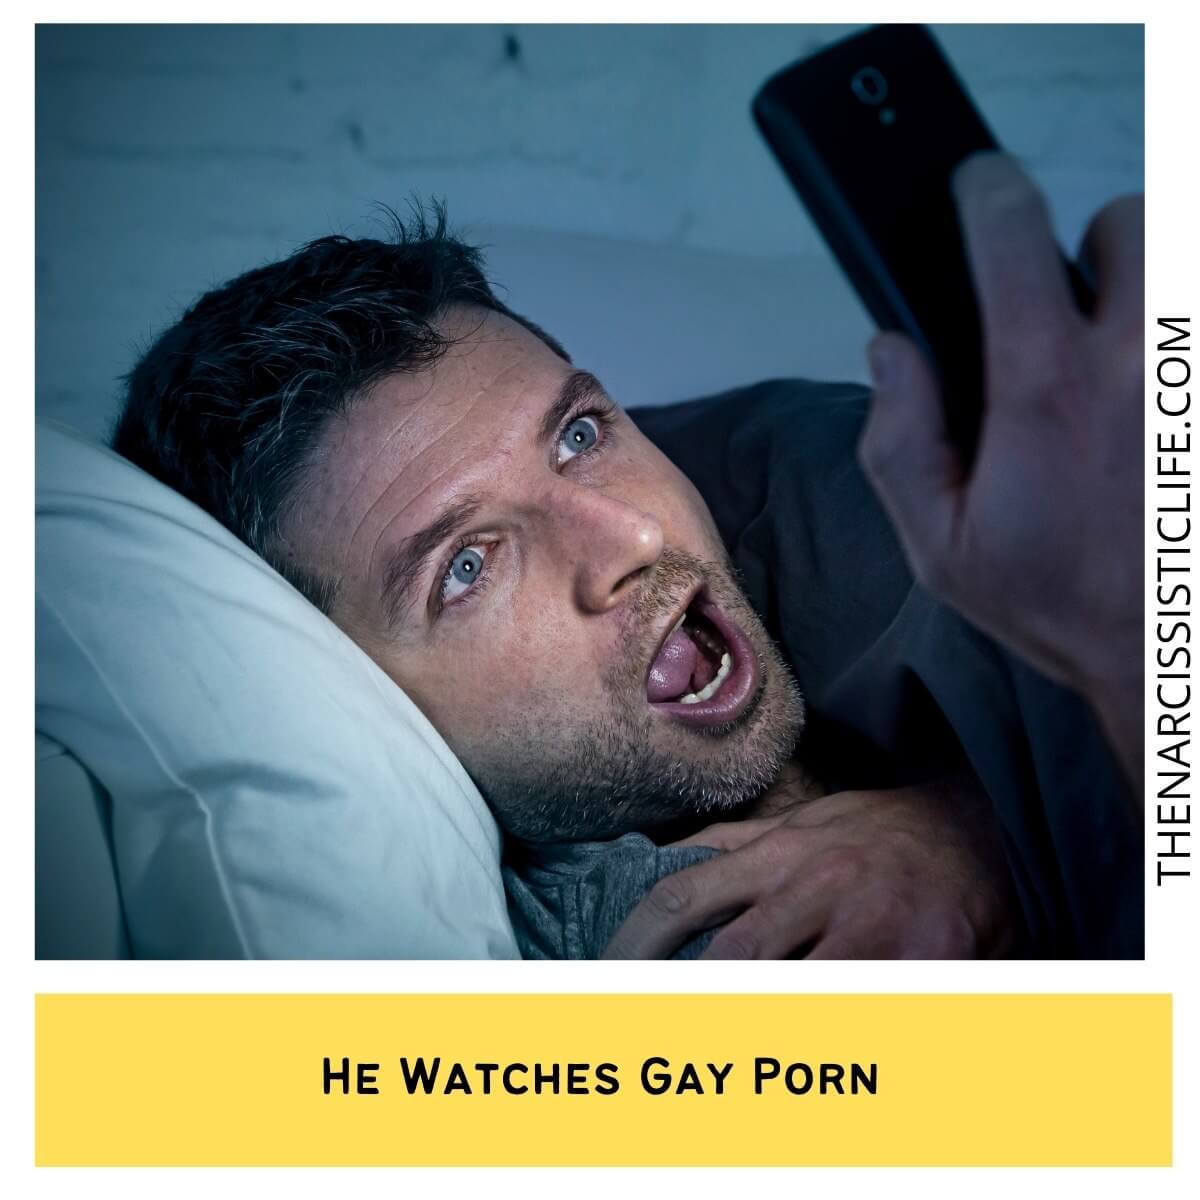 Gay Porn For Women With Men - 16 Signs A Guy Is Pretending To Be Straight - The Narcissistic Life